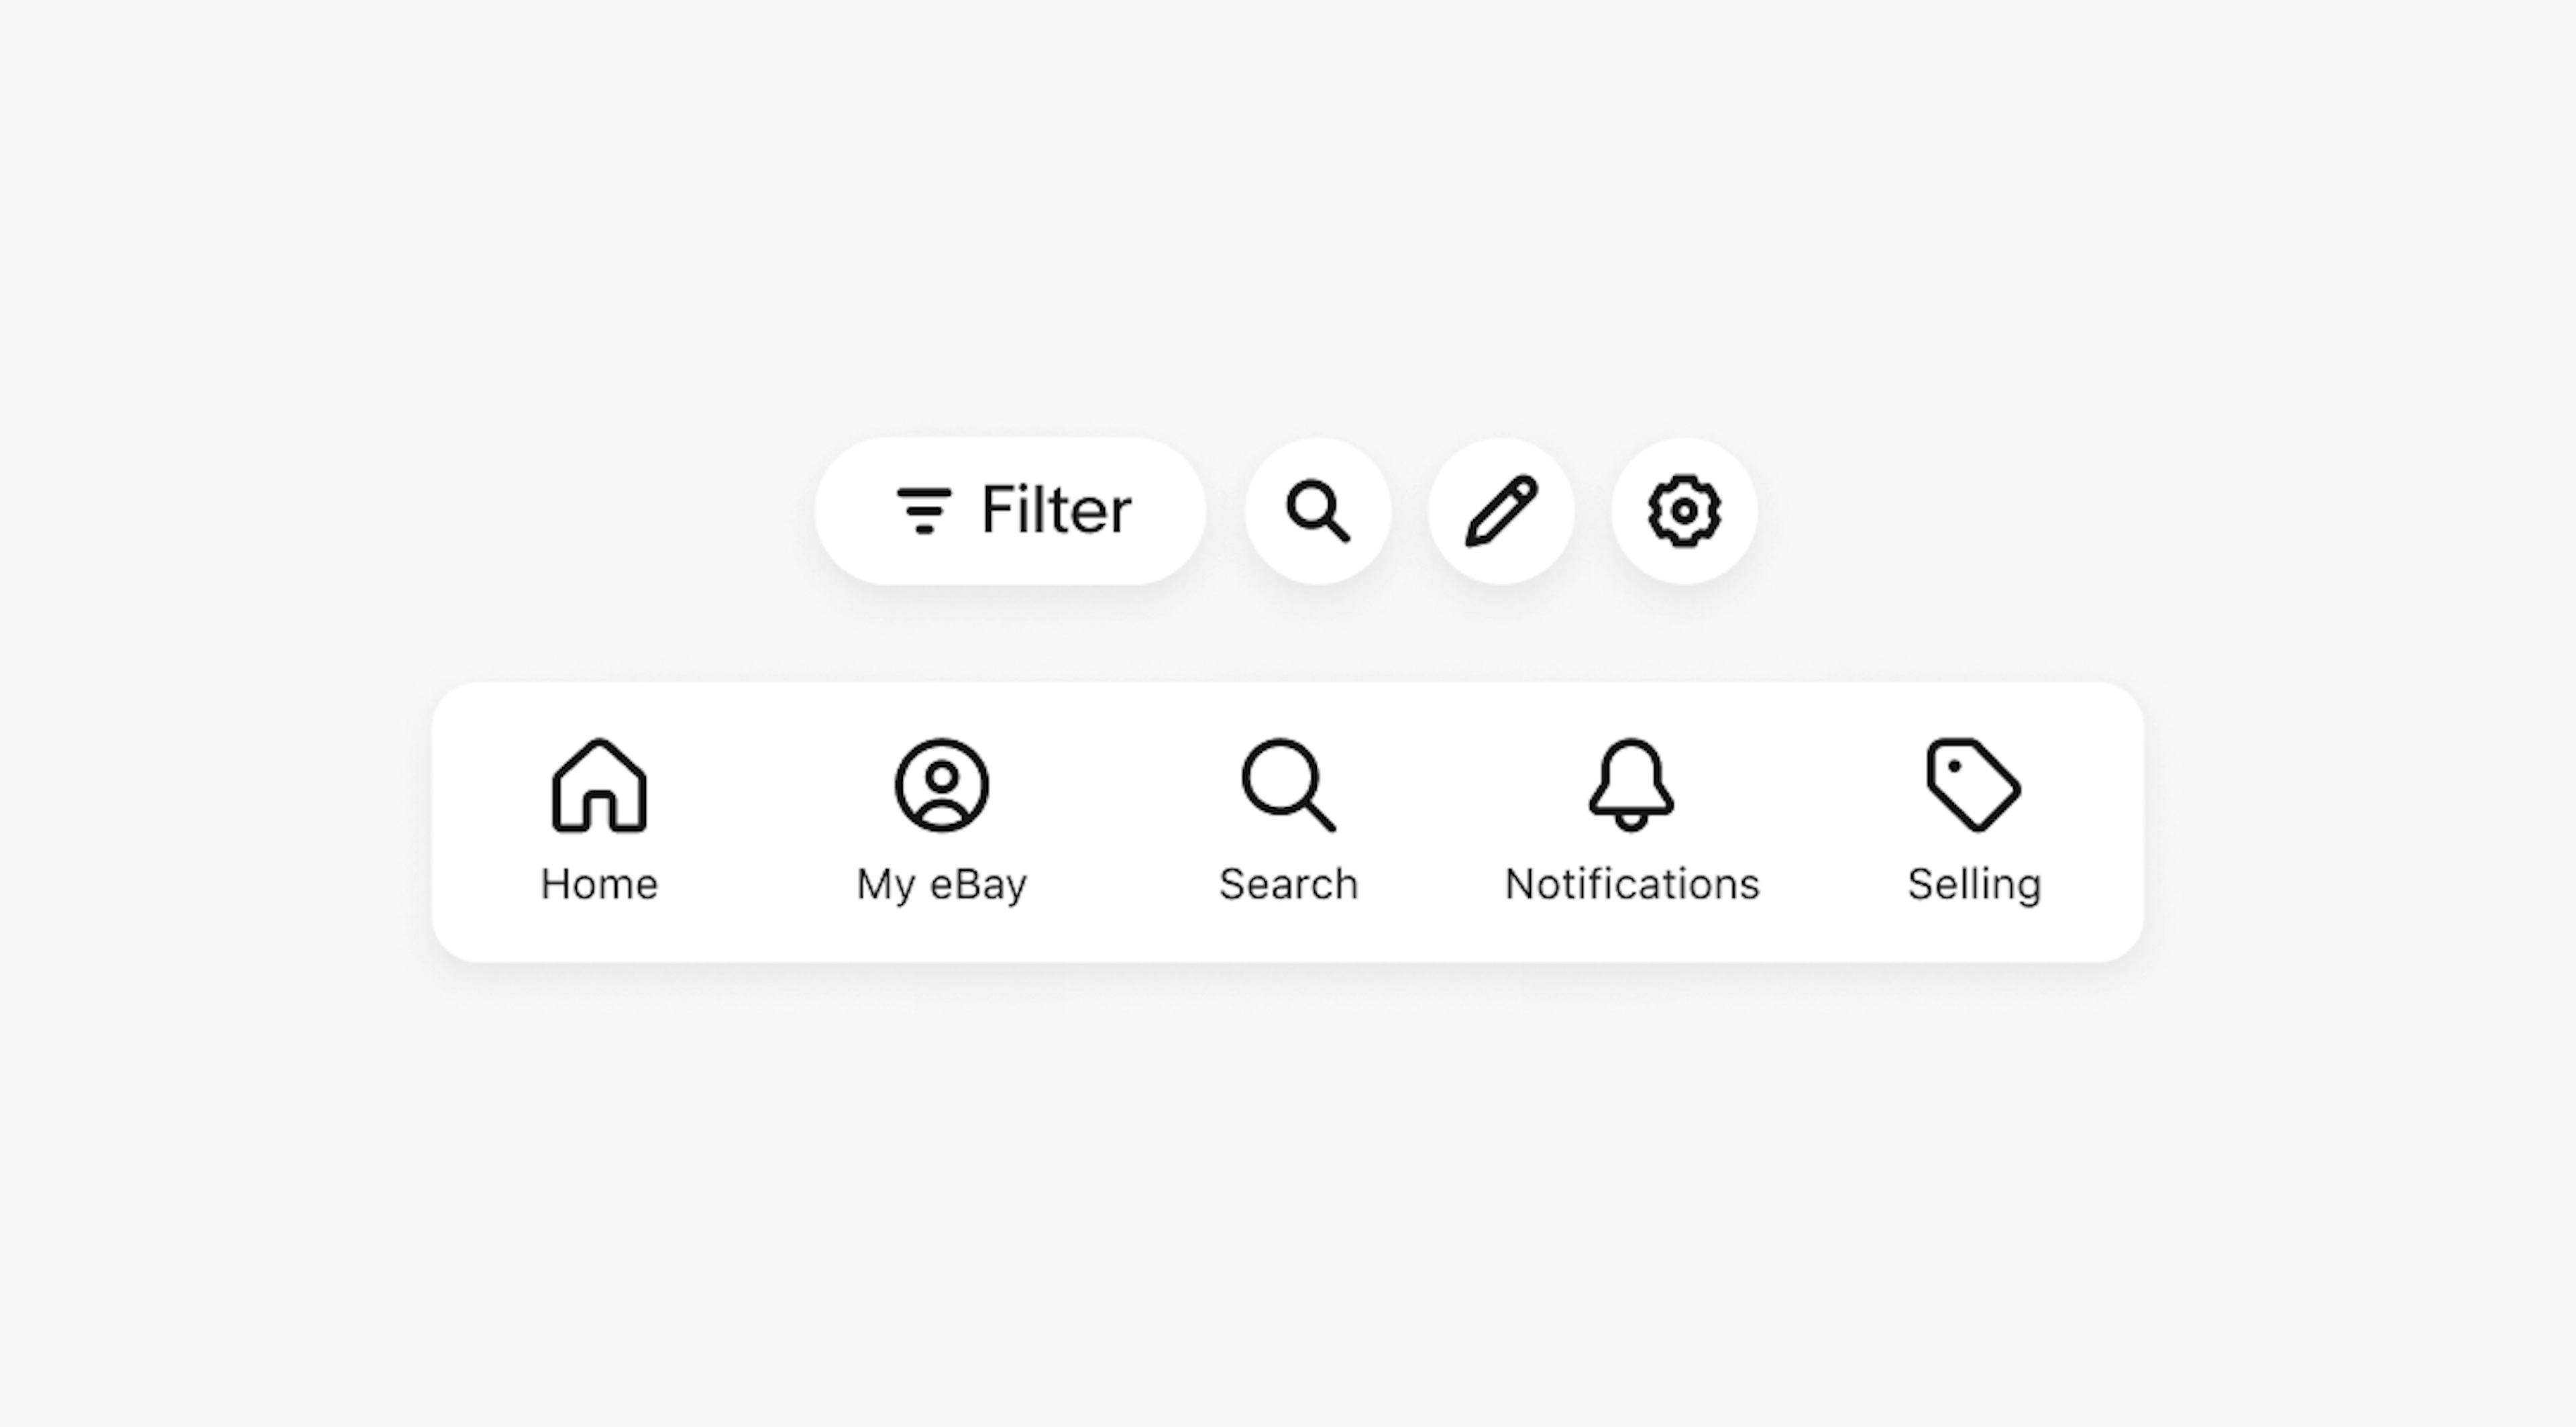 Two rows of icons. The top row contains 16px icons. From left to right is filter, search, edit, settings. The bottom row contains 24px icons. The icons are in a bottom nav bar. From left to right are home, my ebay, search, notification, selling.